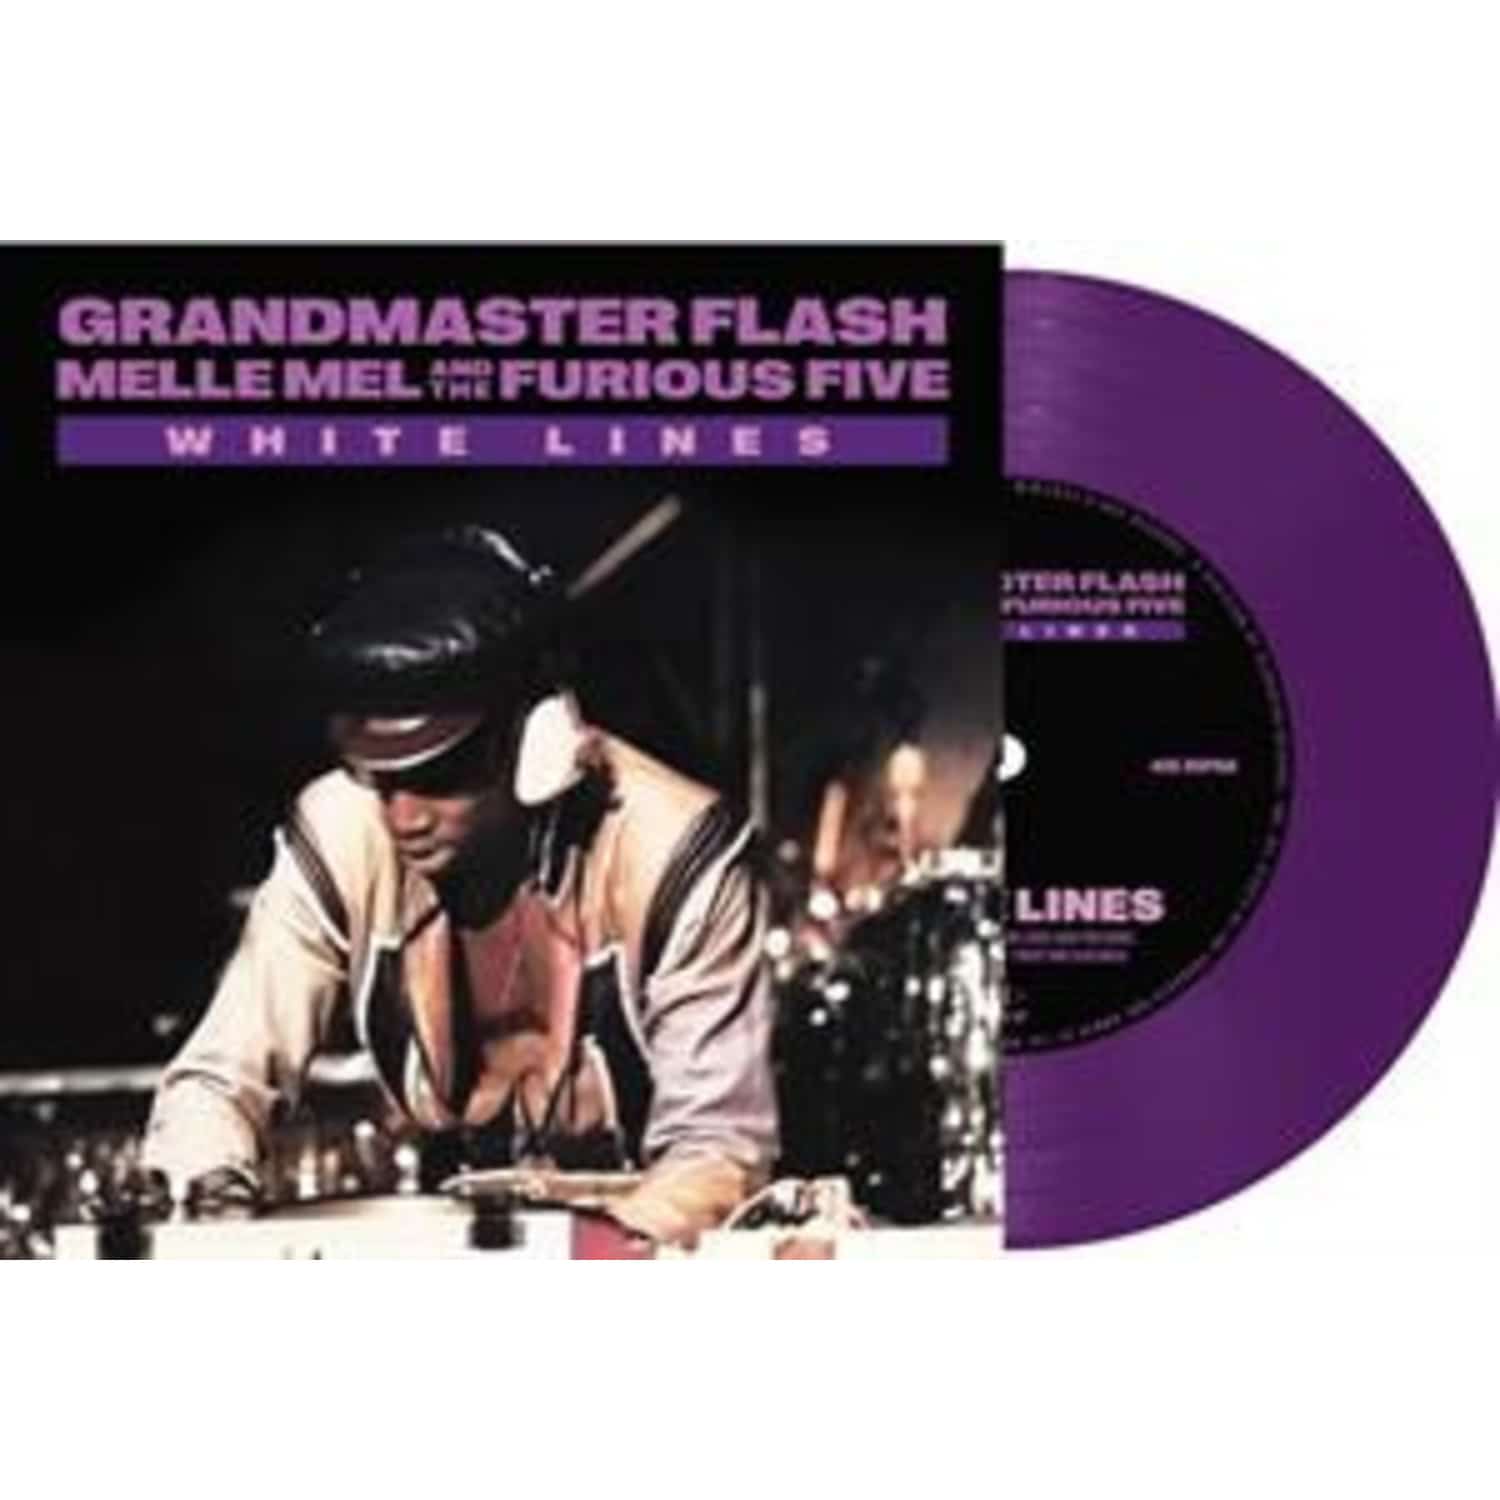 Grandmaster Flash With Melle Mel and the Furious Five - WHITE LINES 